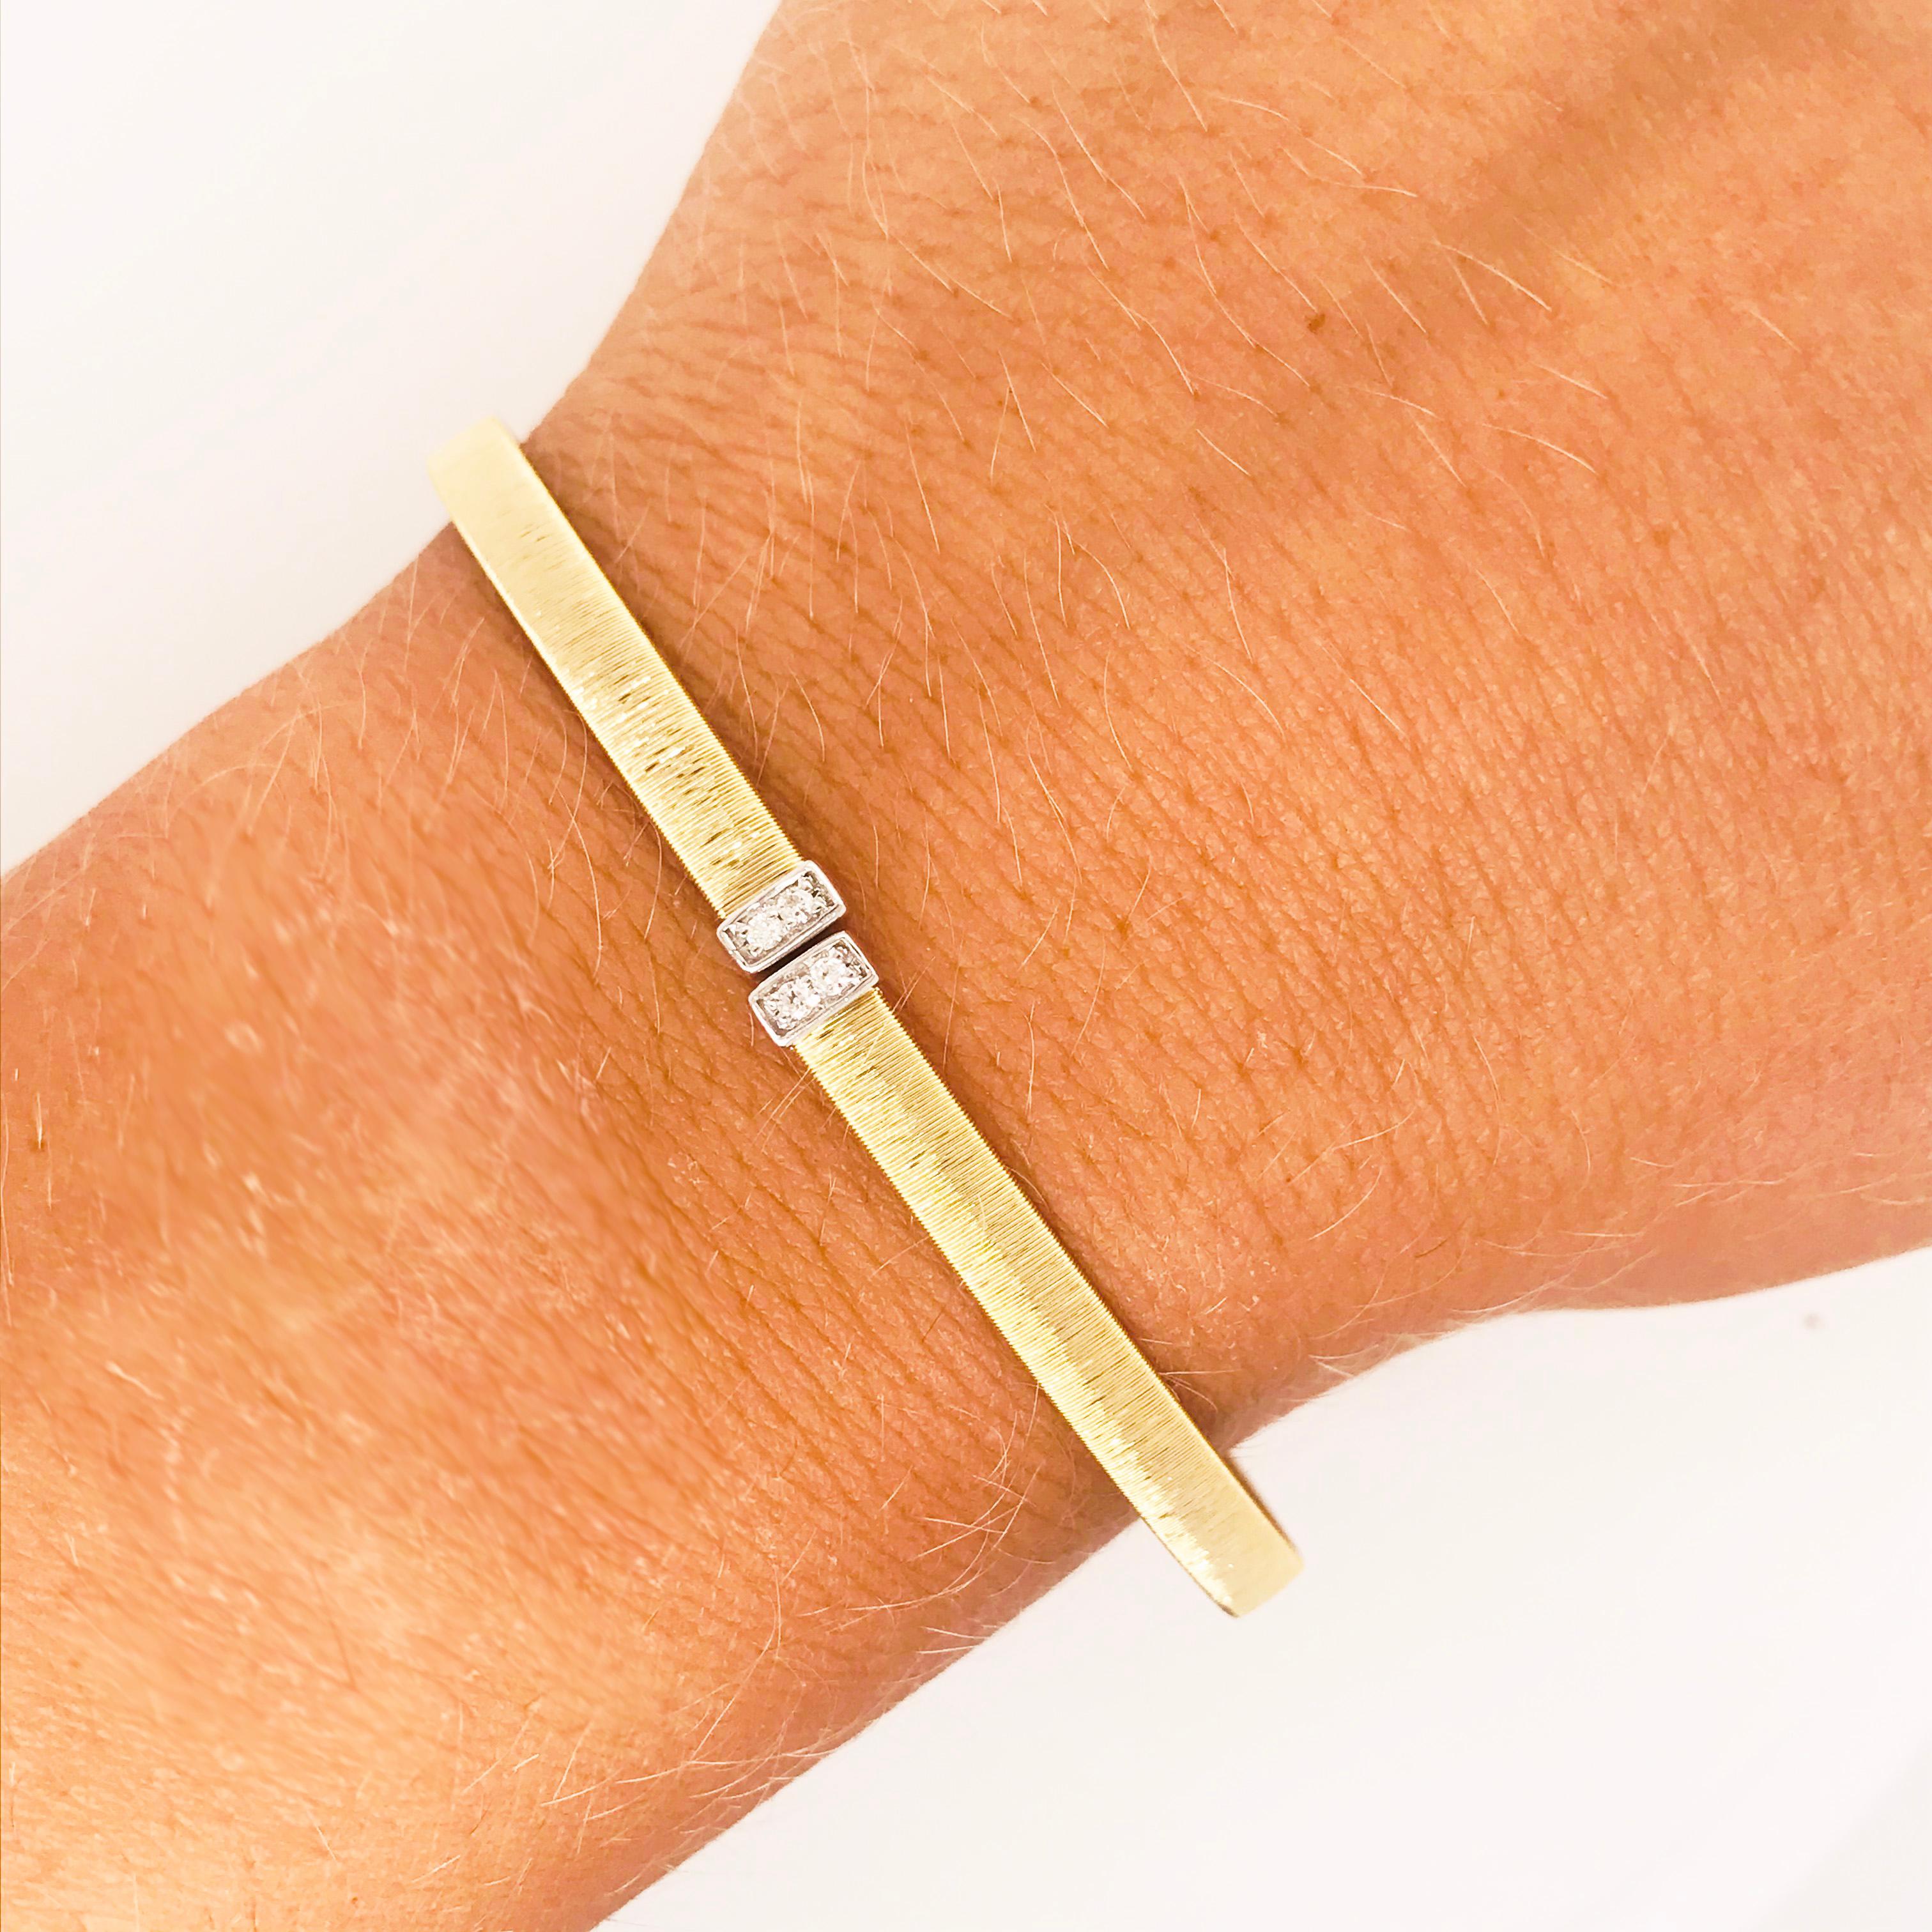 This 14 karat yellow gold satin cuff bangle bracelet is flexible and easy to put on and secure once you get it on!  This bracelet is a very modern, design that touts quality and an eye for style.  There is a white gold, rectangle that has a total of